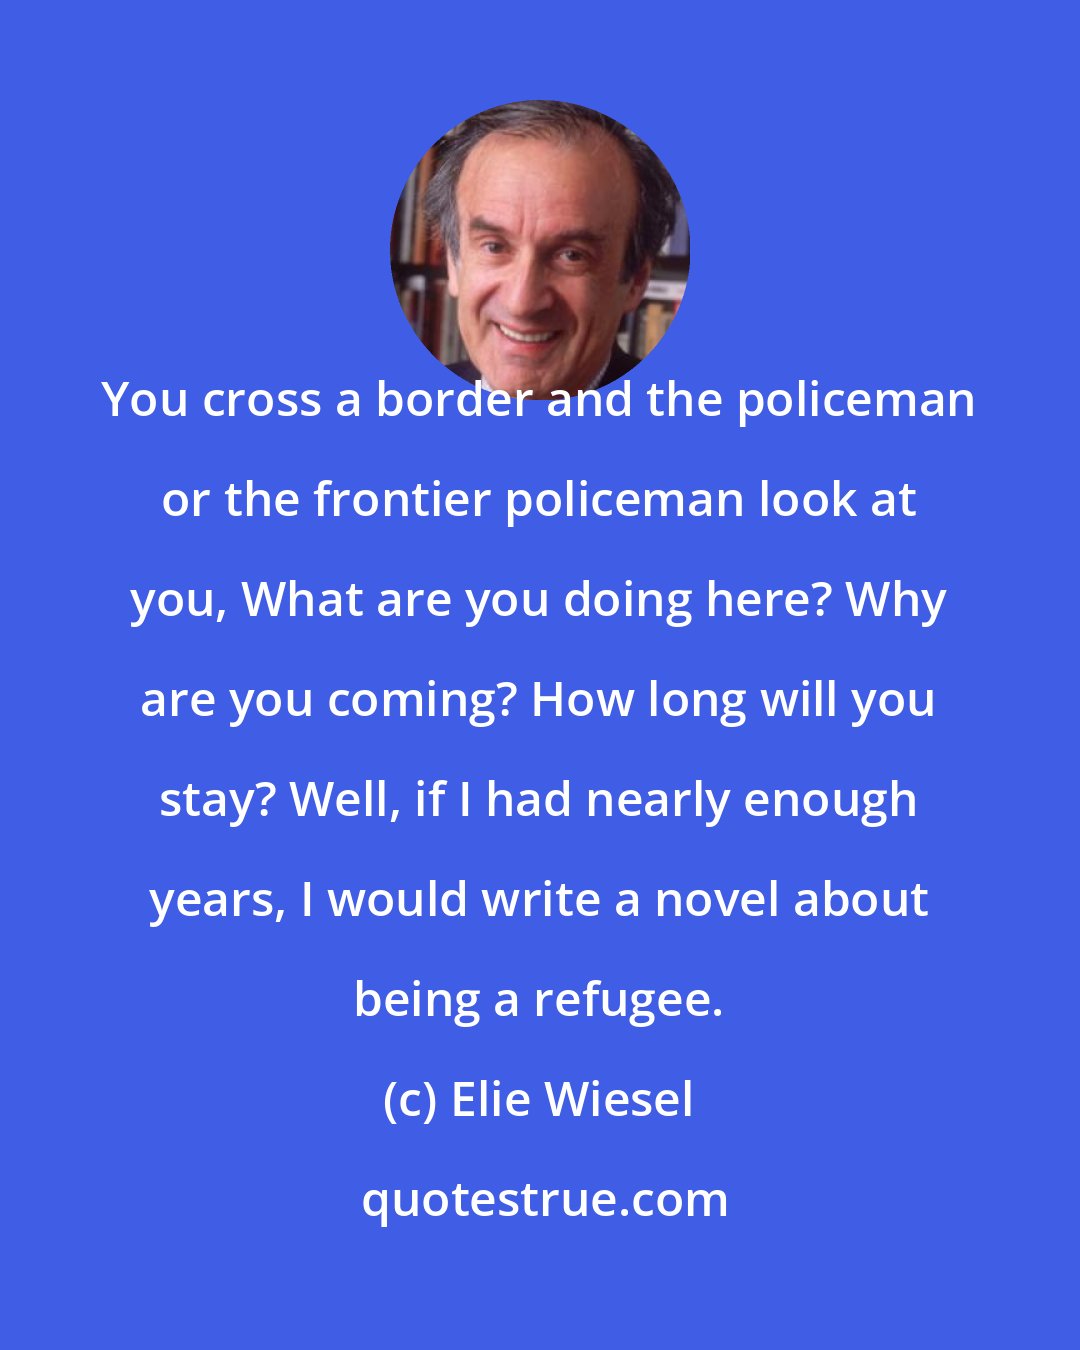 Elie Wiesel: You cross a border and the policeman or the frontier policeman look at you, What are you doing here? Why are you coming? How long will you stay? Well, if I had nearly enough years, I would write a novel about being a refugee.